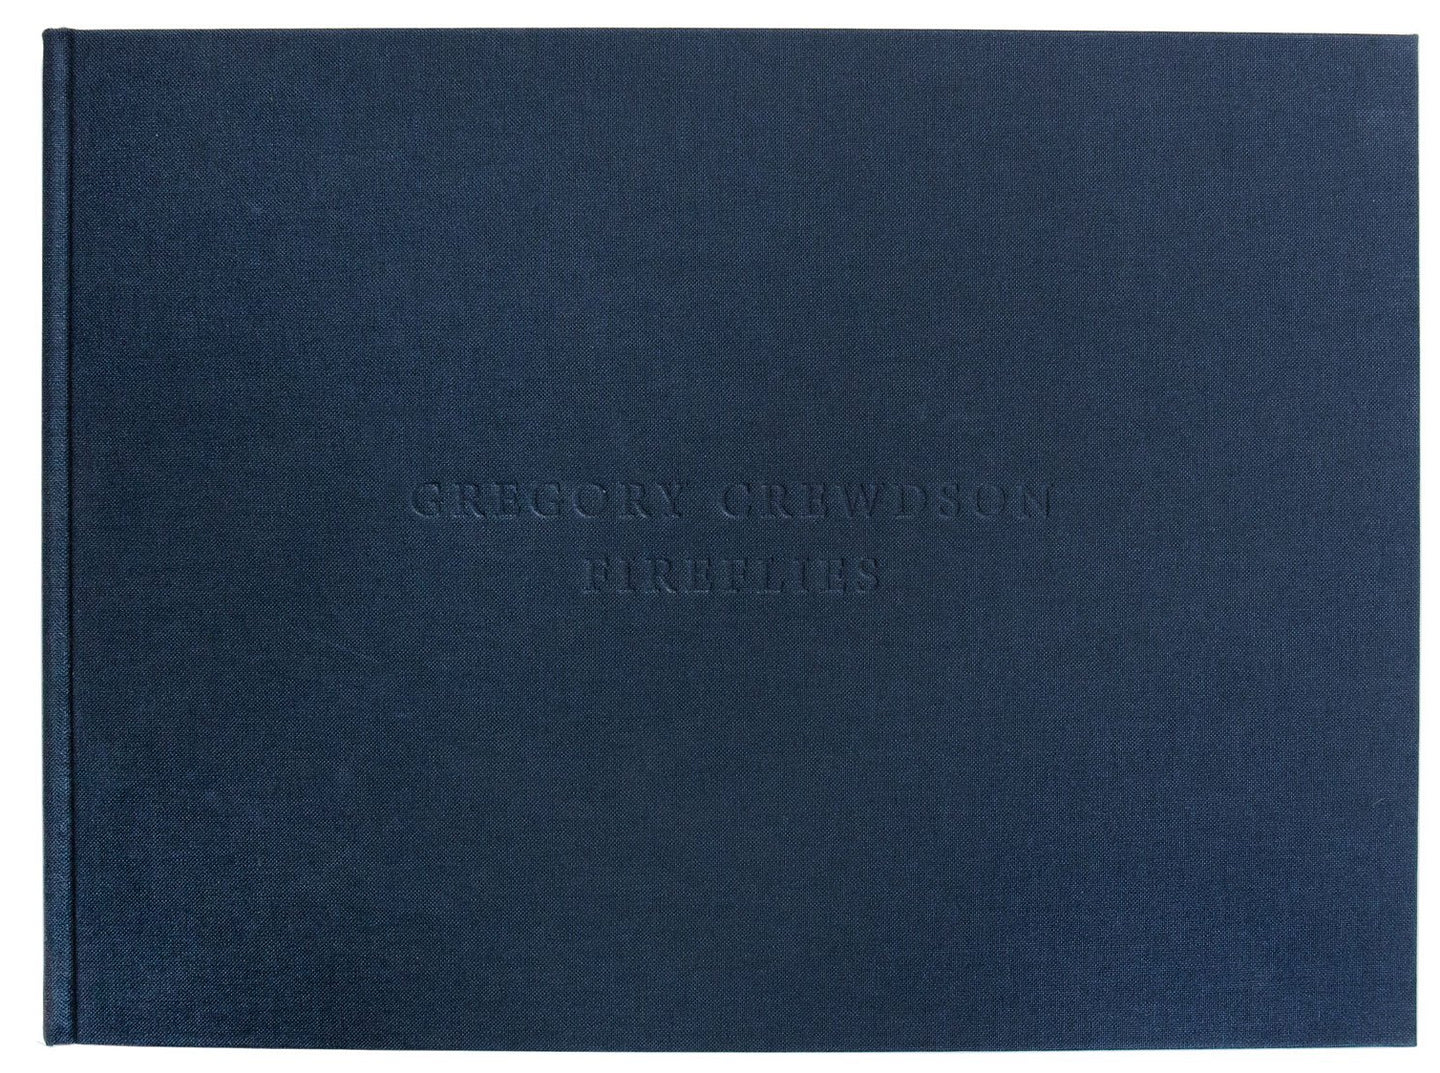 Cover of Gregory Crewdson's publication 